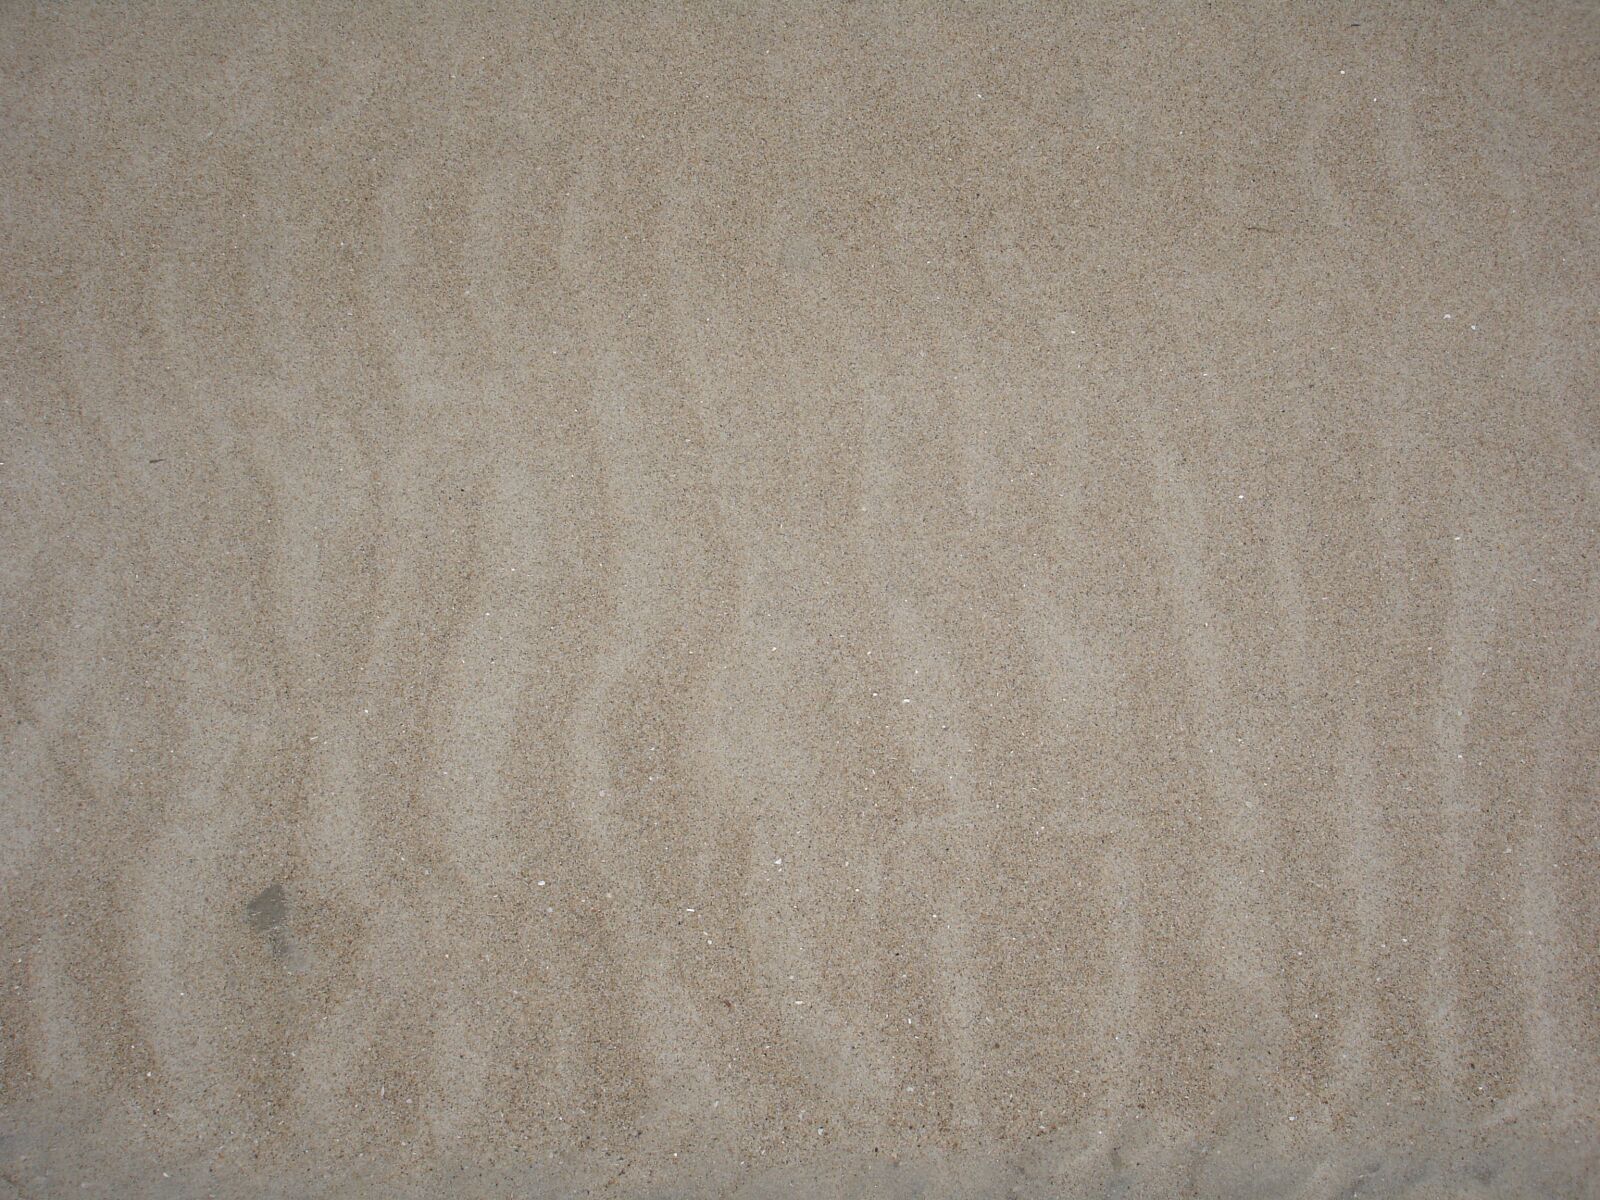 Sony DSC-P200 sample photo. Sand nine, extraterrestrial, background photography